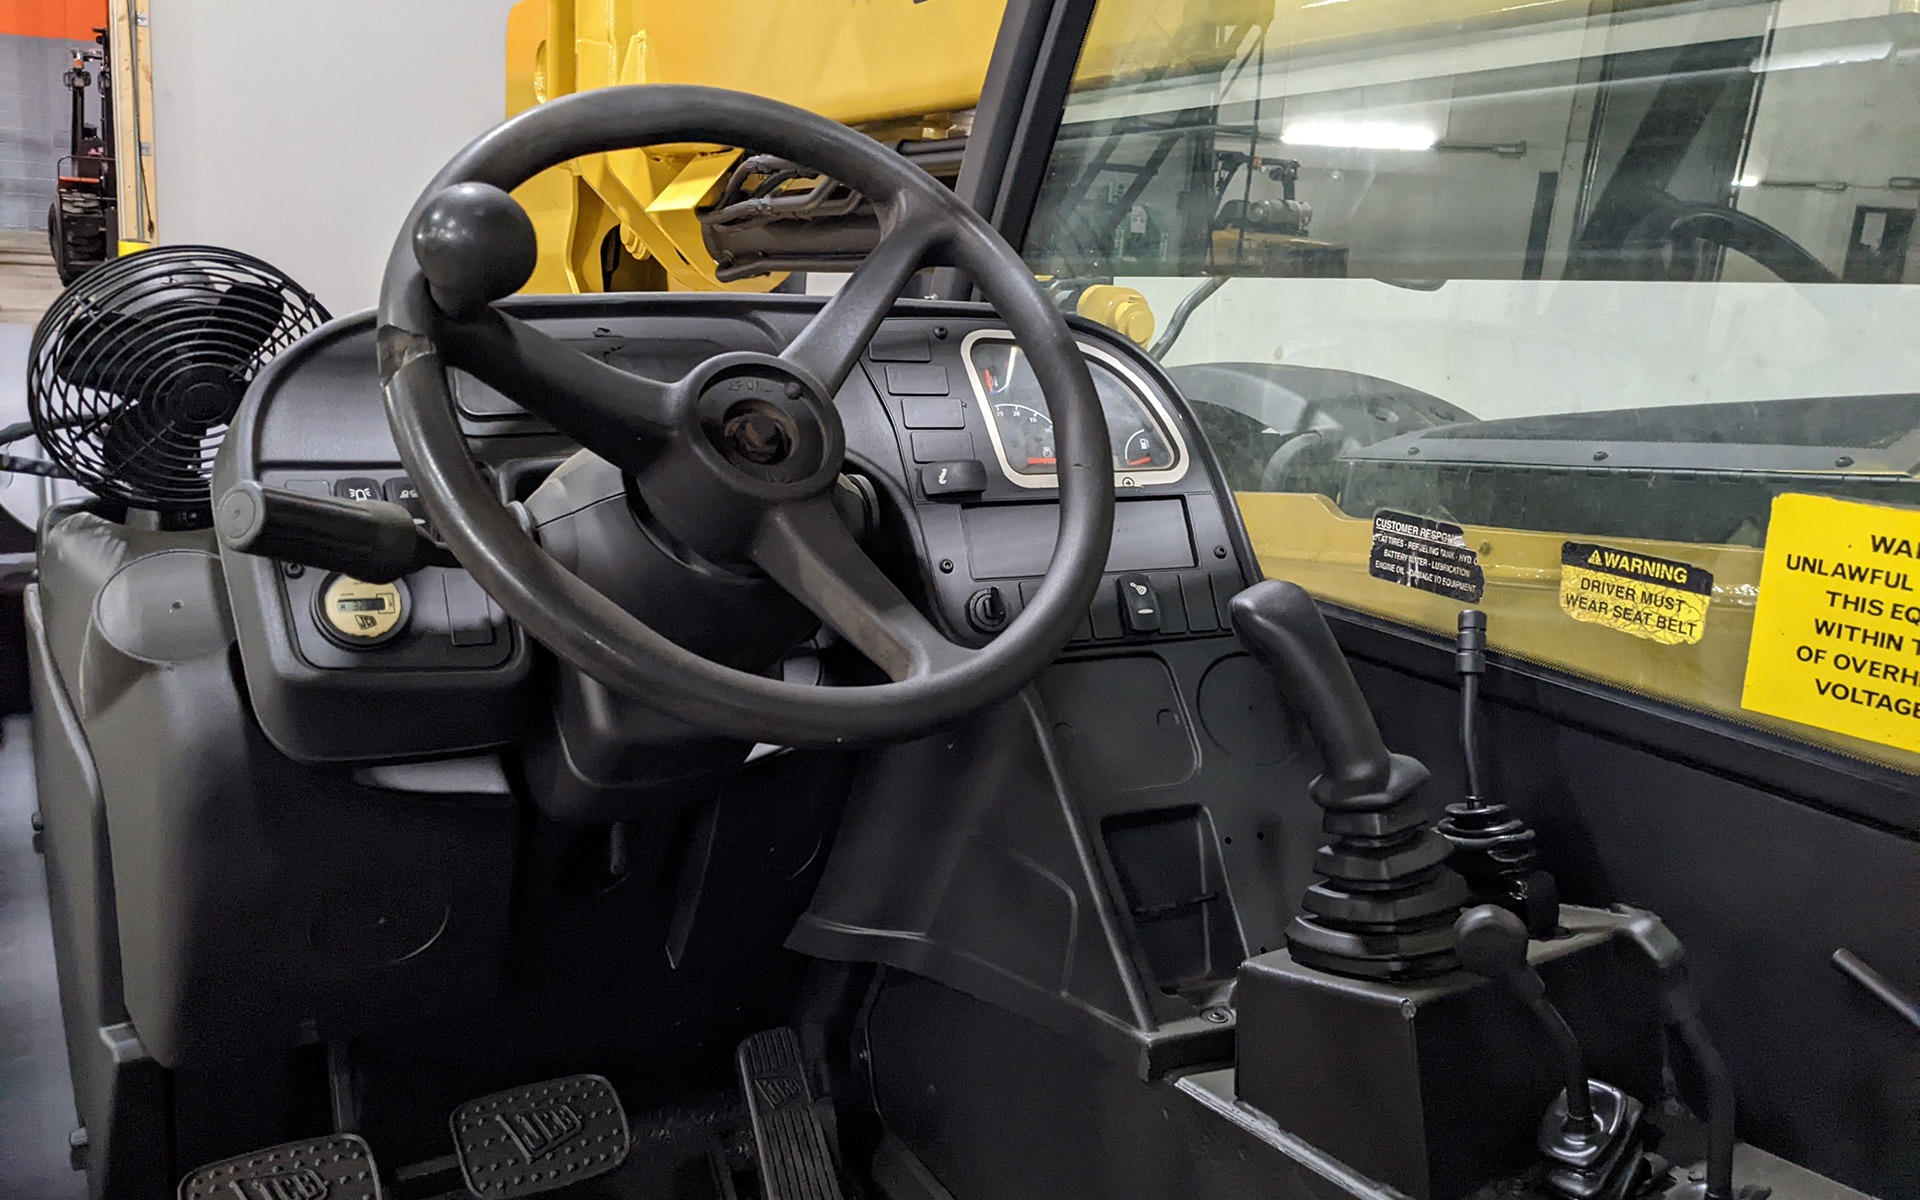 Used 2014 JCB 507-42  | Cary, IL